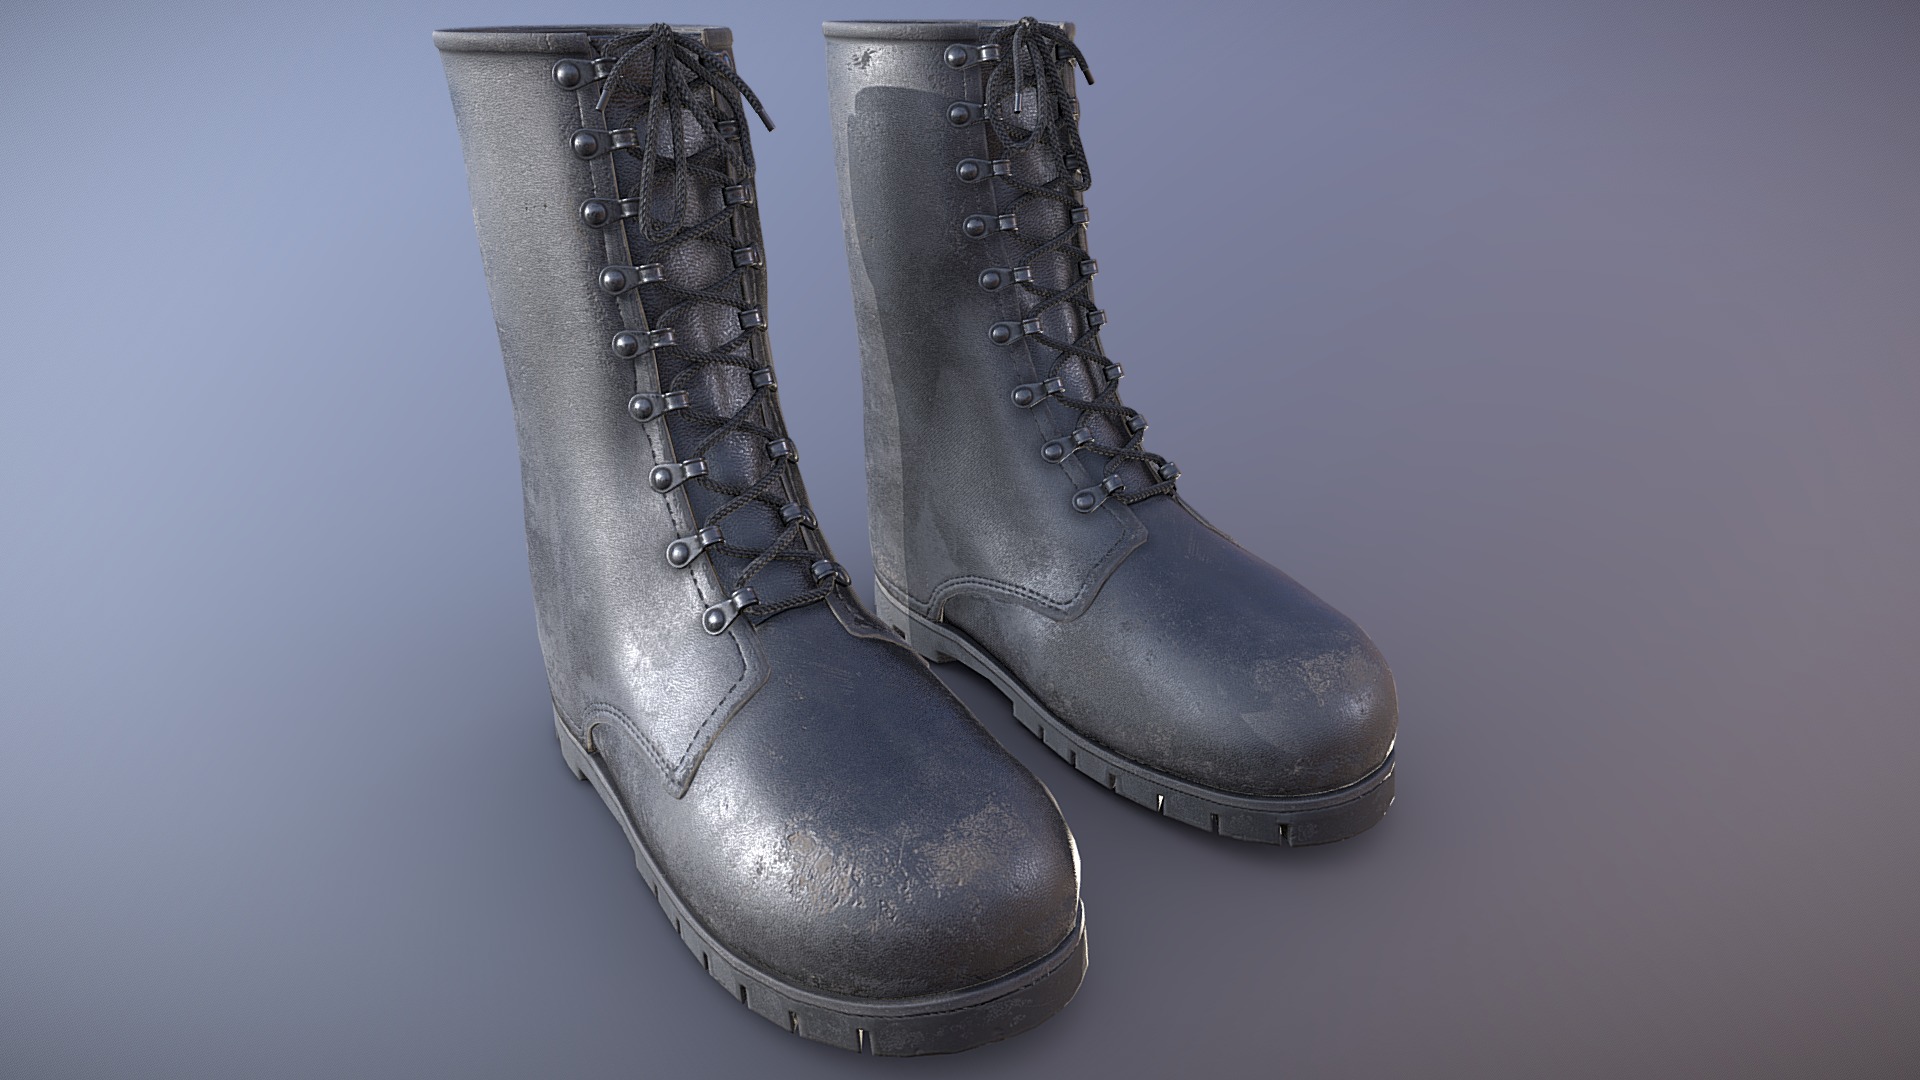 3D model Military Boots - This is a 3D model of the Military Boots. The 3D model is about a pair of black boots.